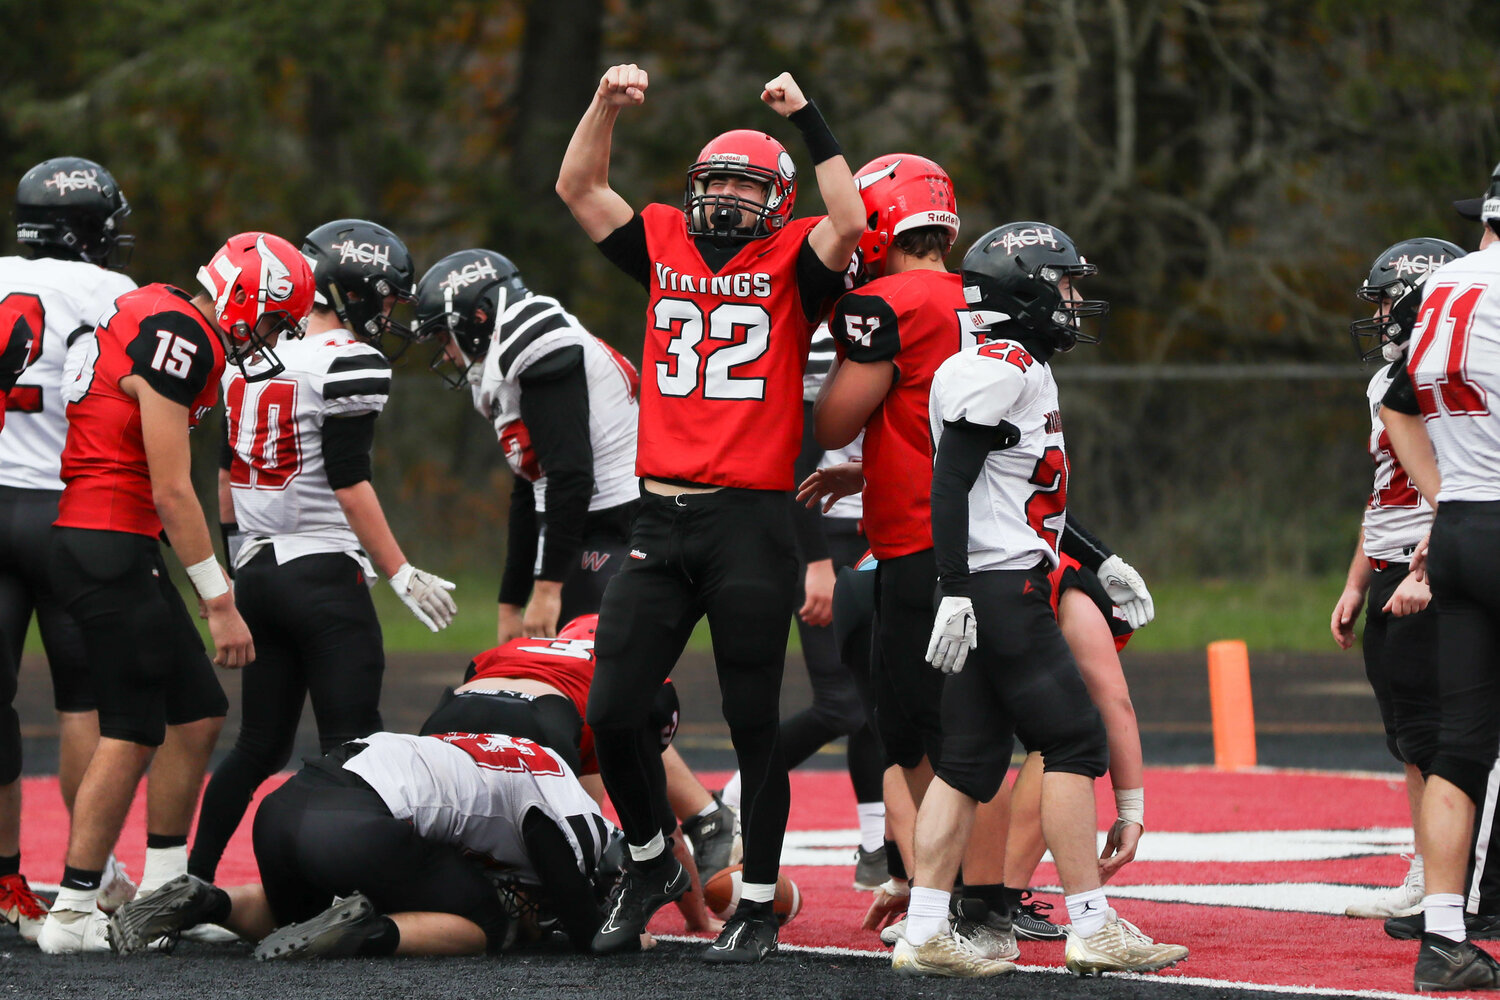 Hunter Isom celebrates the final touchdown of Mossyrock's 46-30 win over Almira-Coulee-Hartline in the 1B state quarterfinals, Nov. 18 in Tenino.